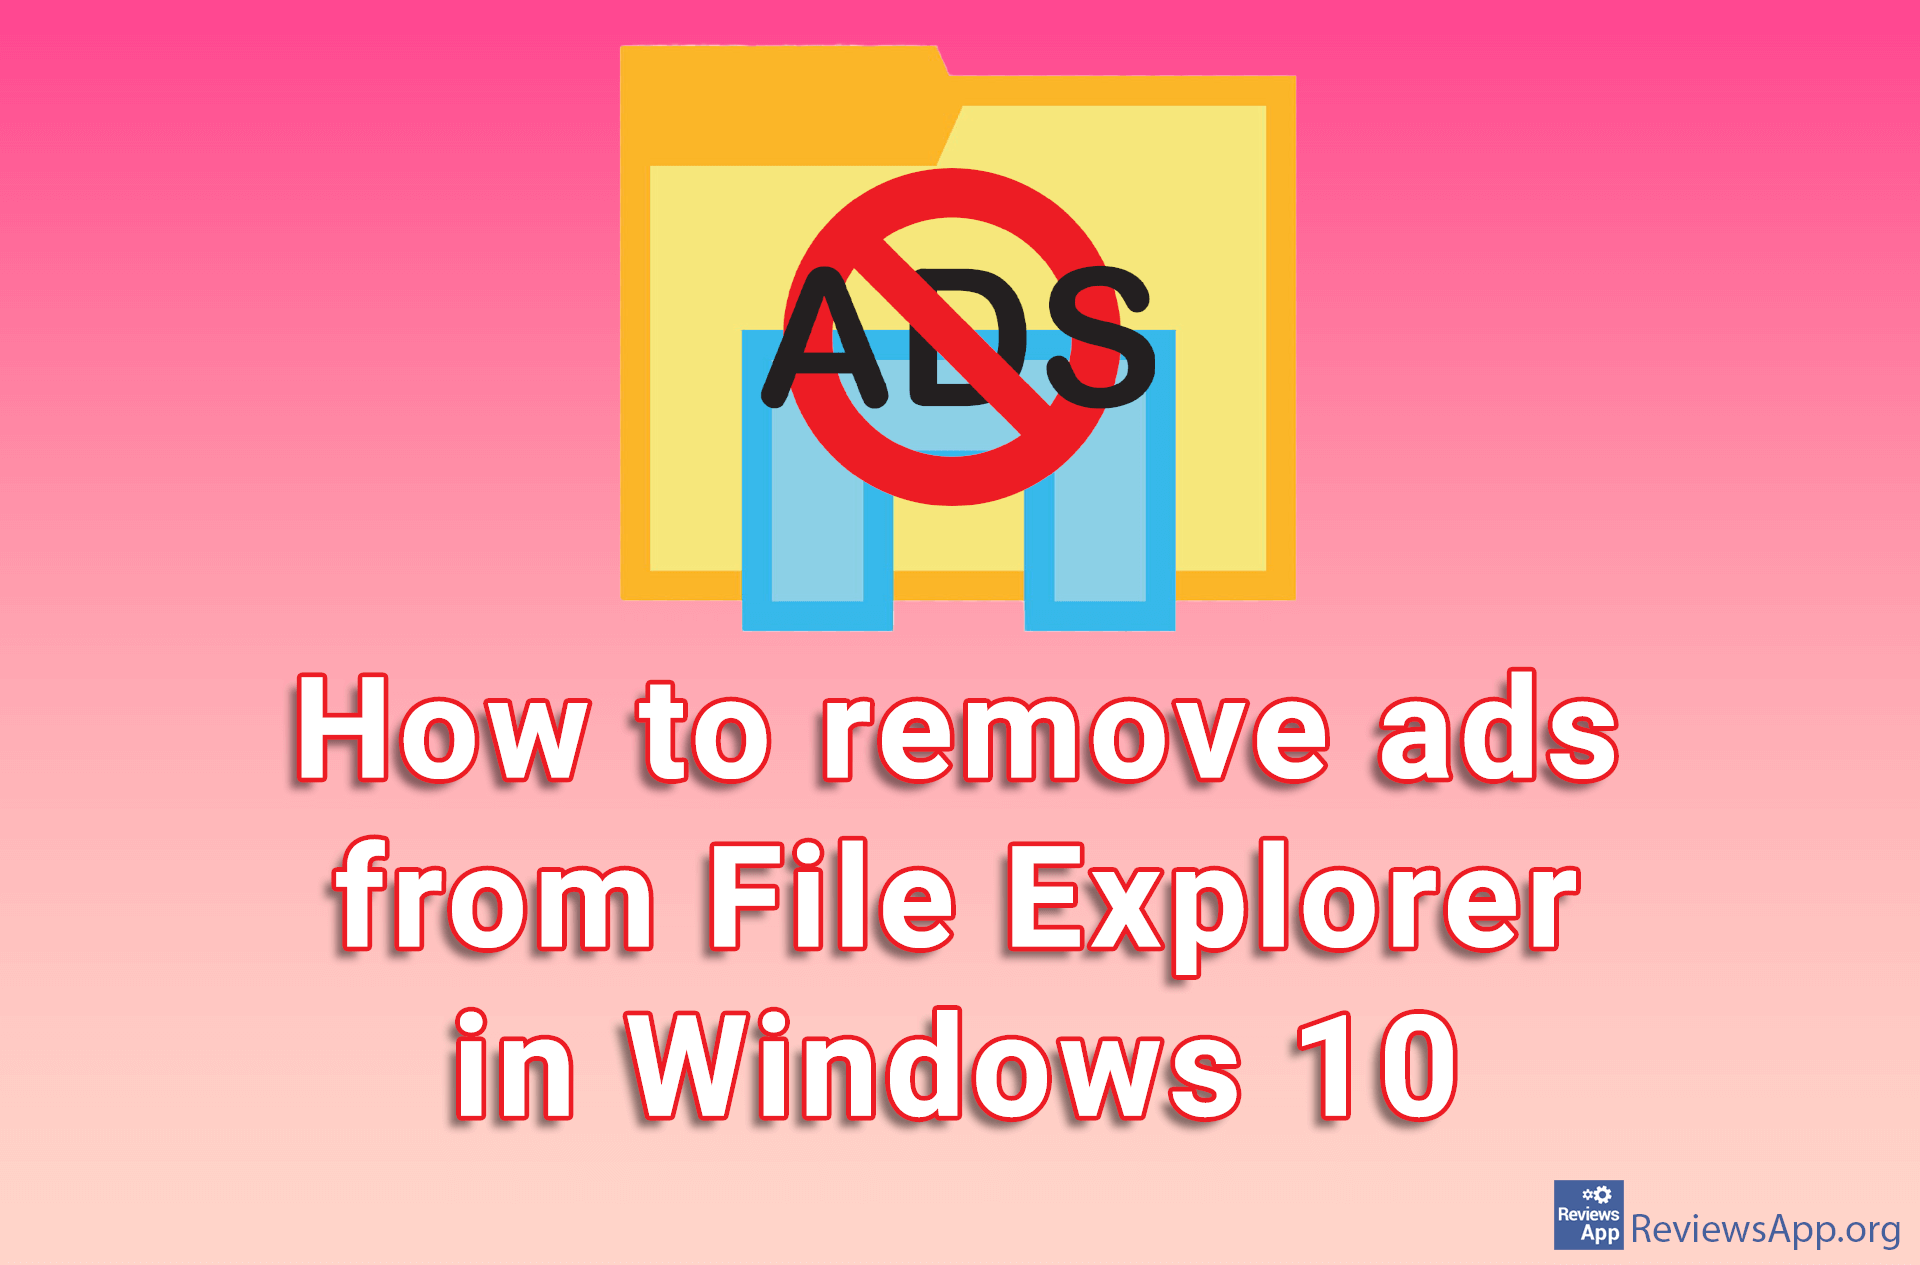 How to remove ads from File Explorer in Windows 10